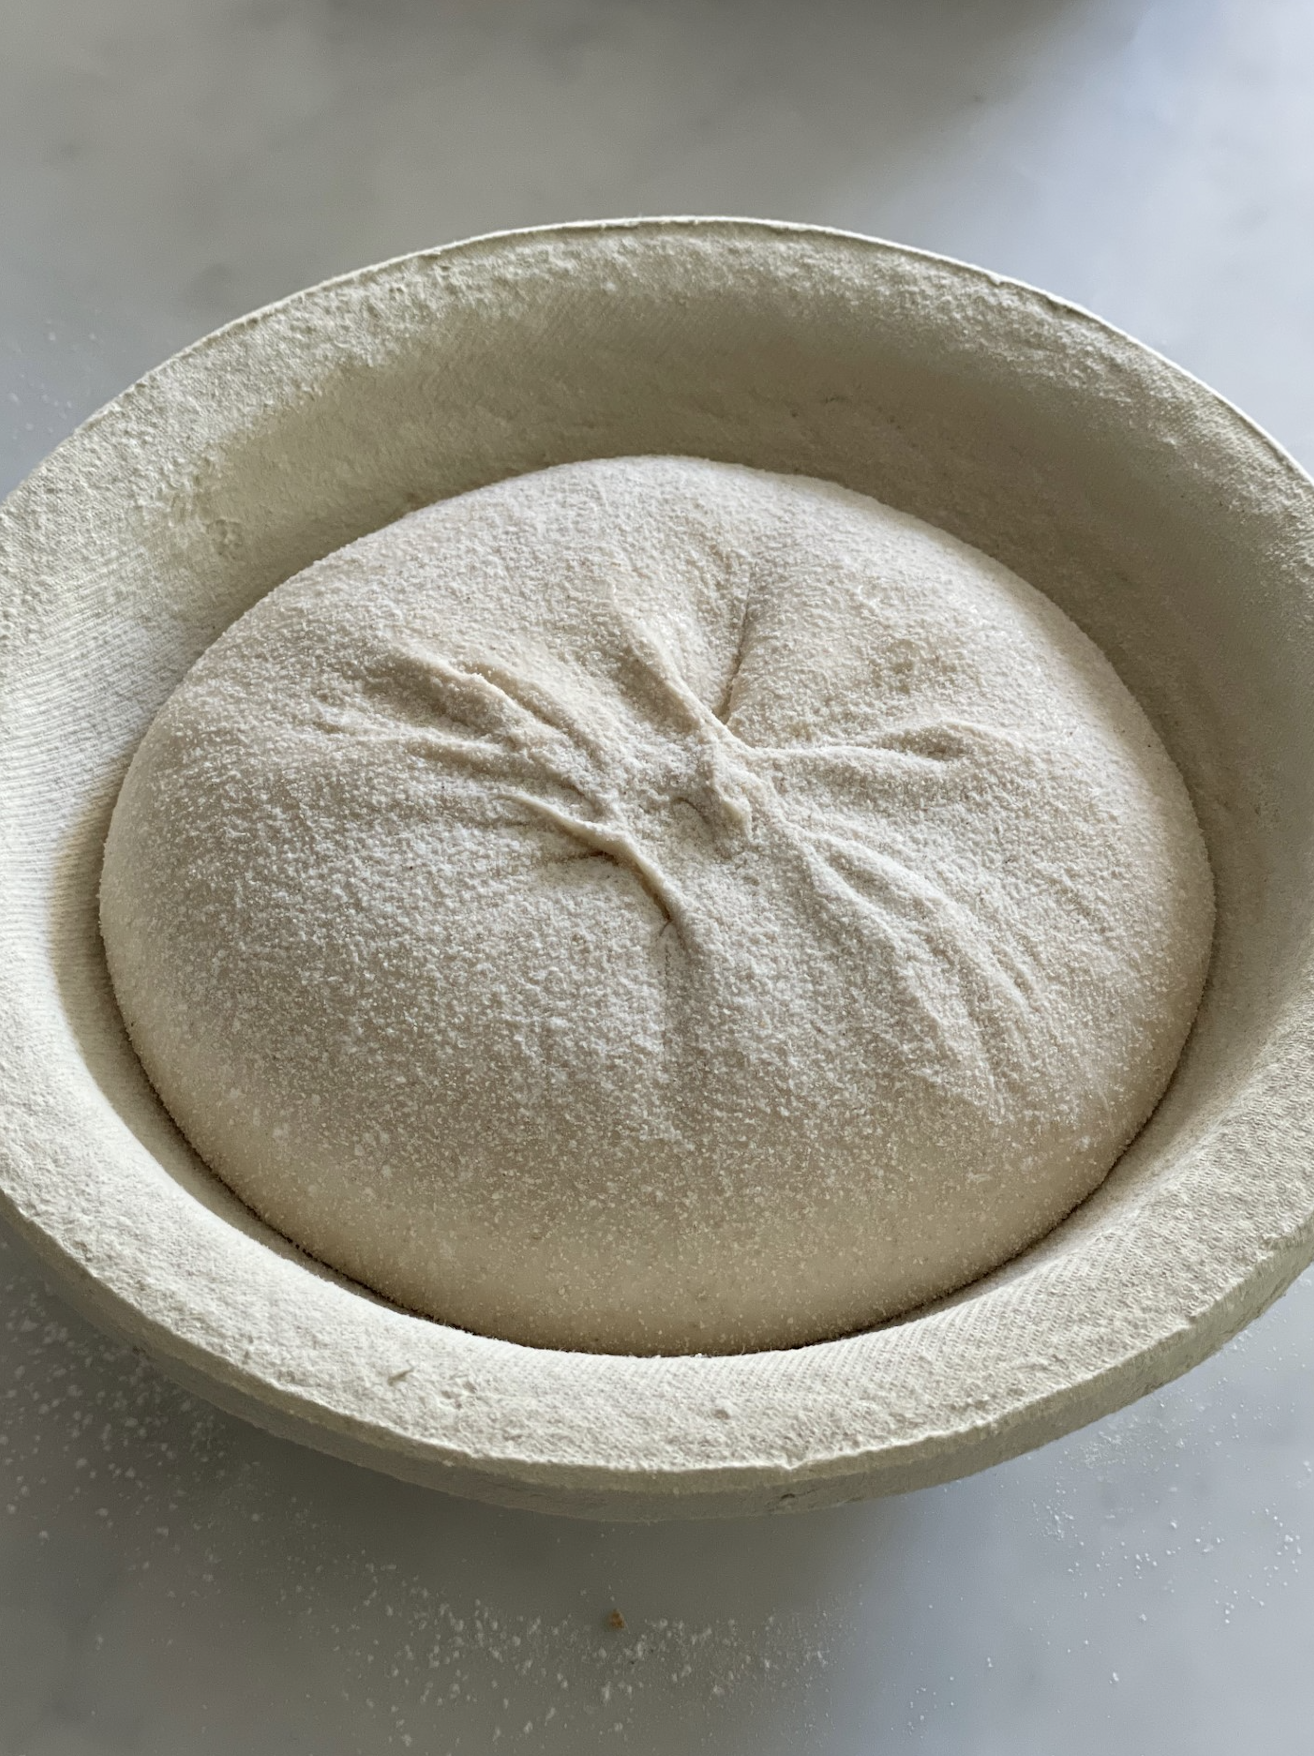 sourdough bread influencer home baker classes teaching recipes trouble shooting help support in England United Kingdom from Marie Lester of @MarieLesterBaker on Instagram 6